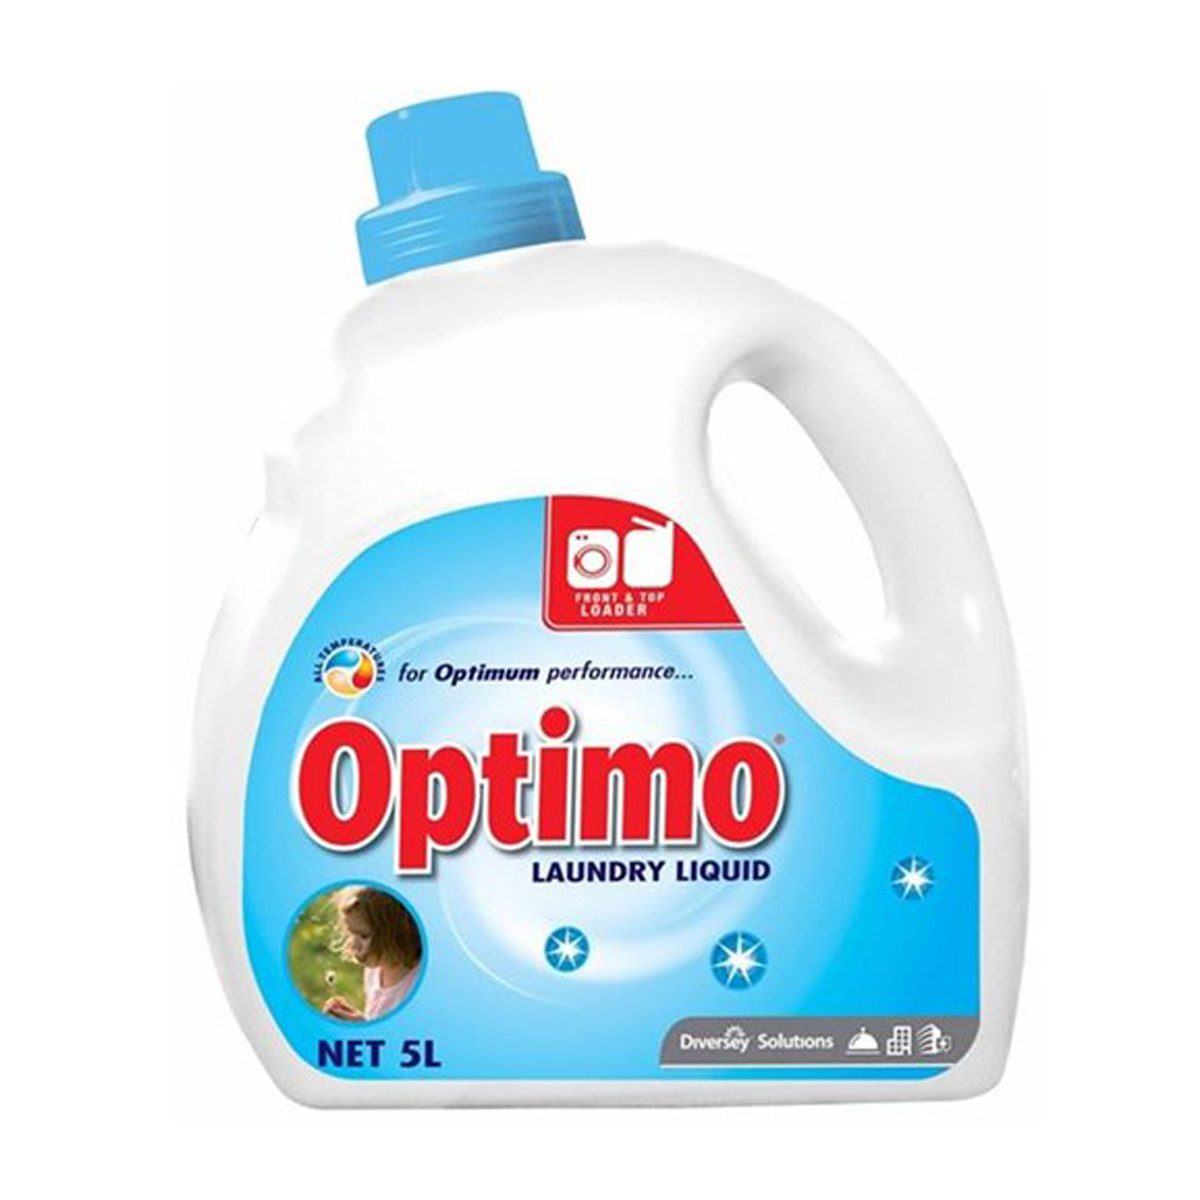 cleaning-products-laundry-optimo-liquid-laundry-det-5L-litre-advanced-stain-removal-ingredients-use-in-front-loader-washing-machines-tough-on-stain removal-yet- gentle-vjs-distributors-5905036